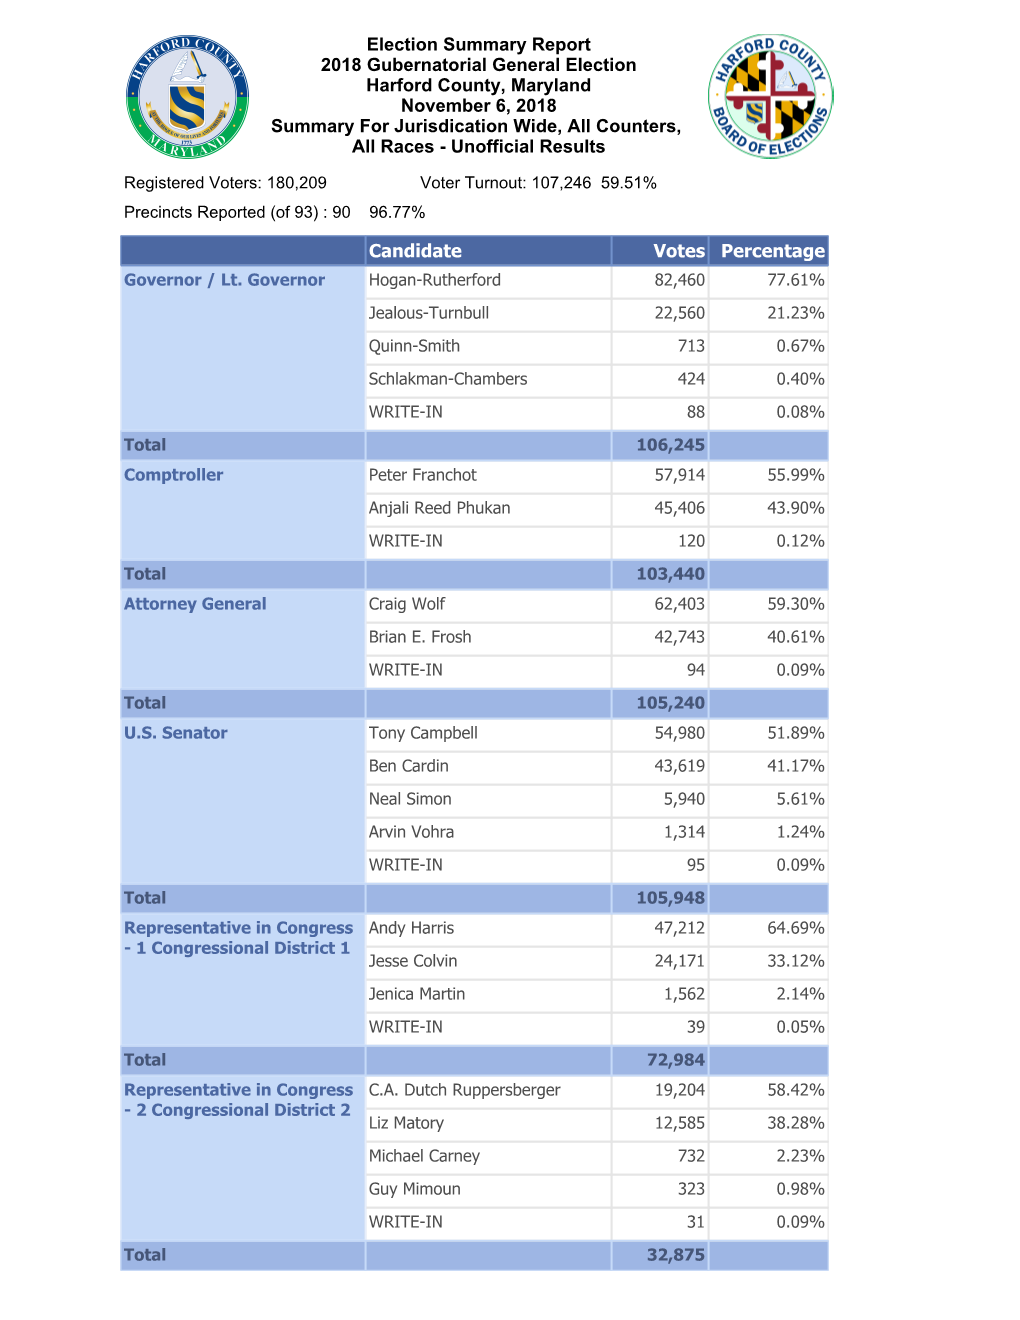 Candidate Votes Percentage Election Summary Report 2018